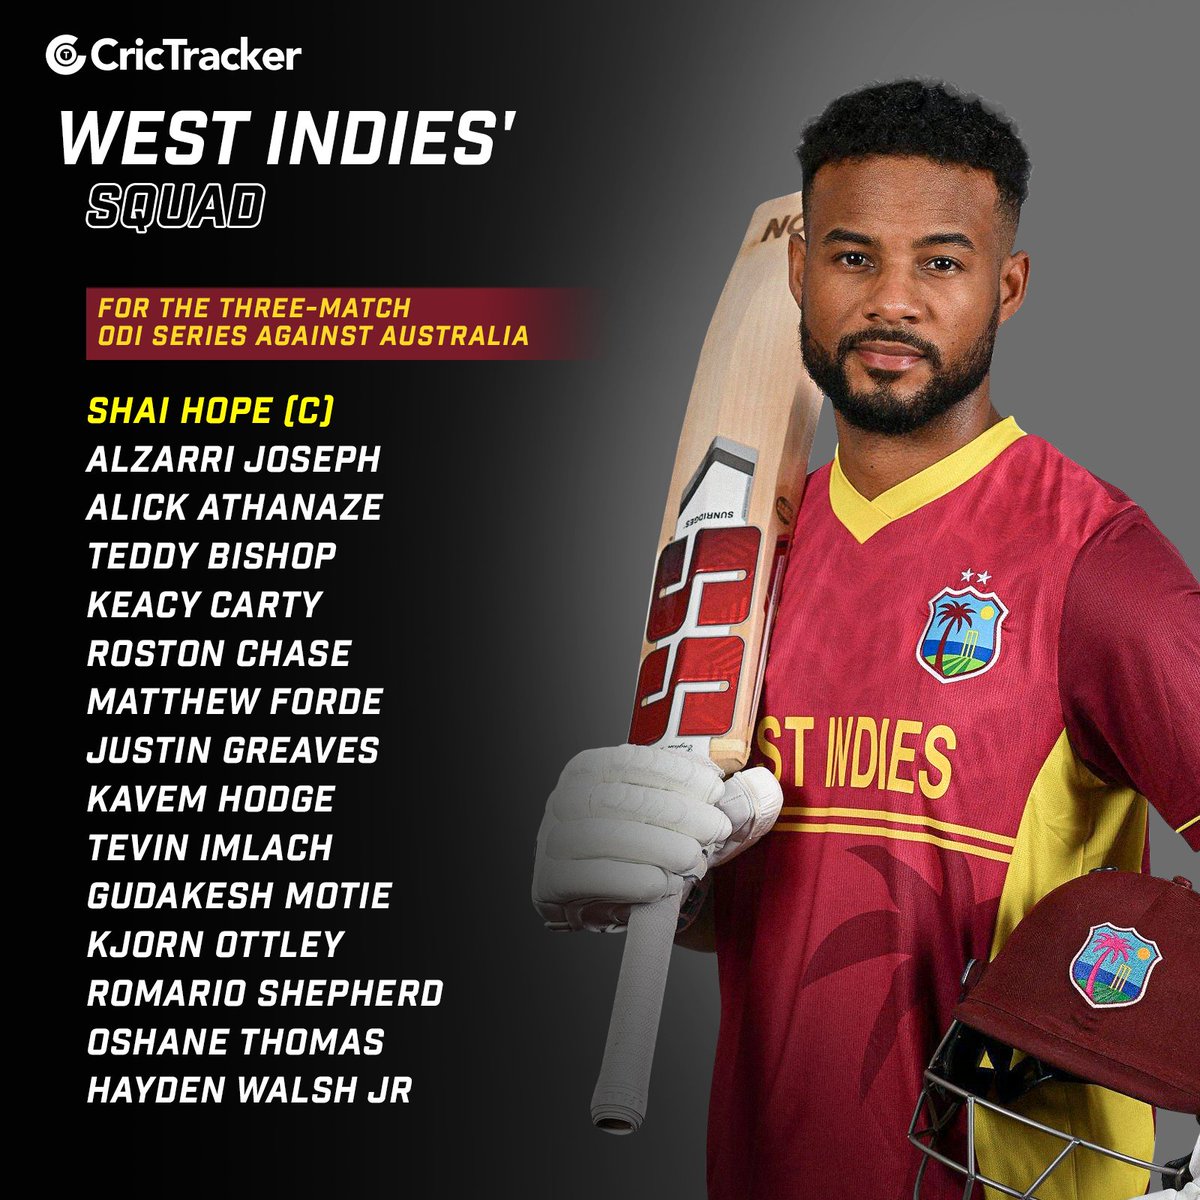 The West Indies have unveiled their squads for the upcoming ODI and T20I series against Australia.

▶️ Teddy Bishop and Tevin Imlach receive their maiden ODI call-ups.
▶️ Jason Holder and Kyle Mayers make a comeback to the T20I squad.
🔴 Shimron Hetmyer does not secure a spot in…